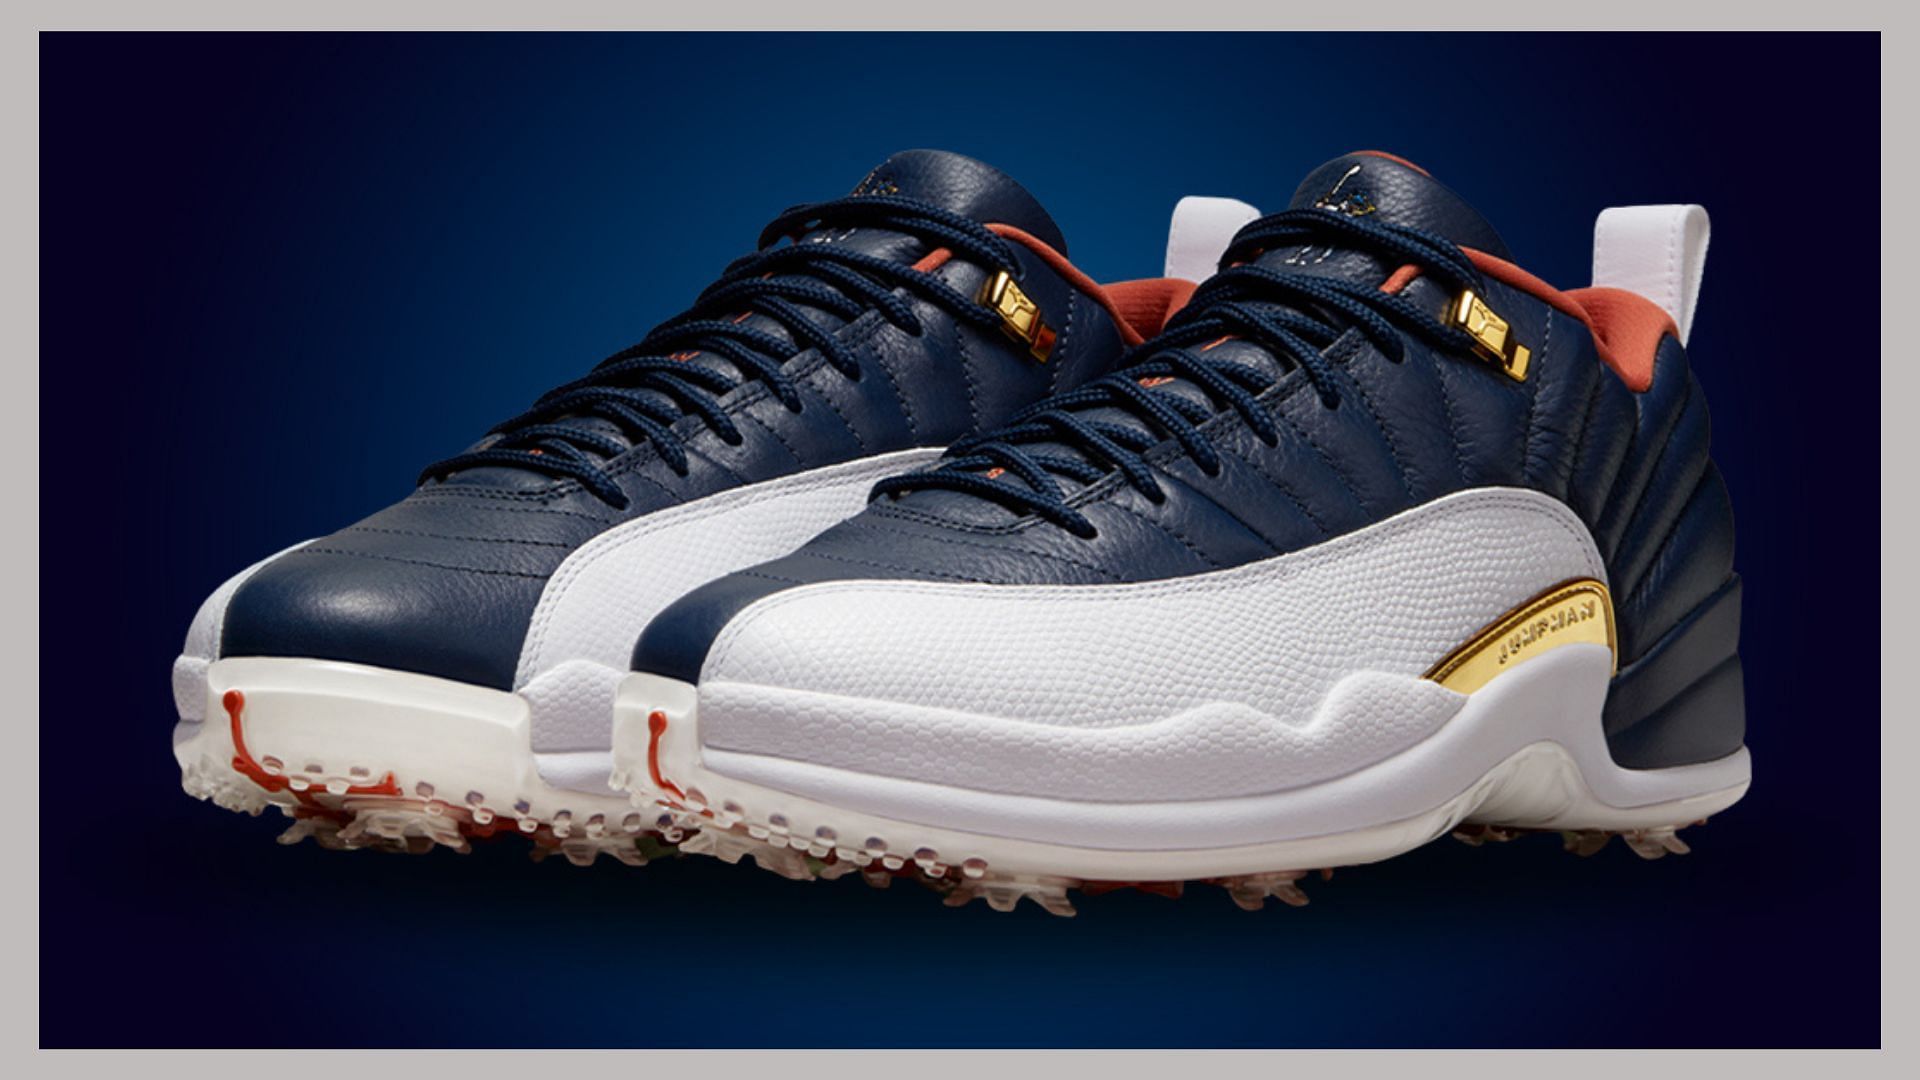 Where to buy Eastside Golf x Air Jordan 12 Low shoes? Price and more